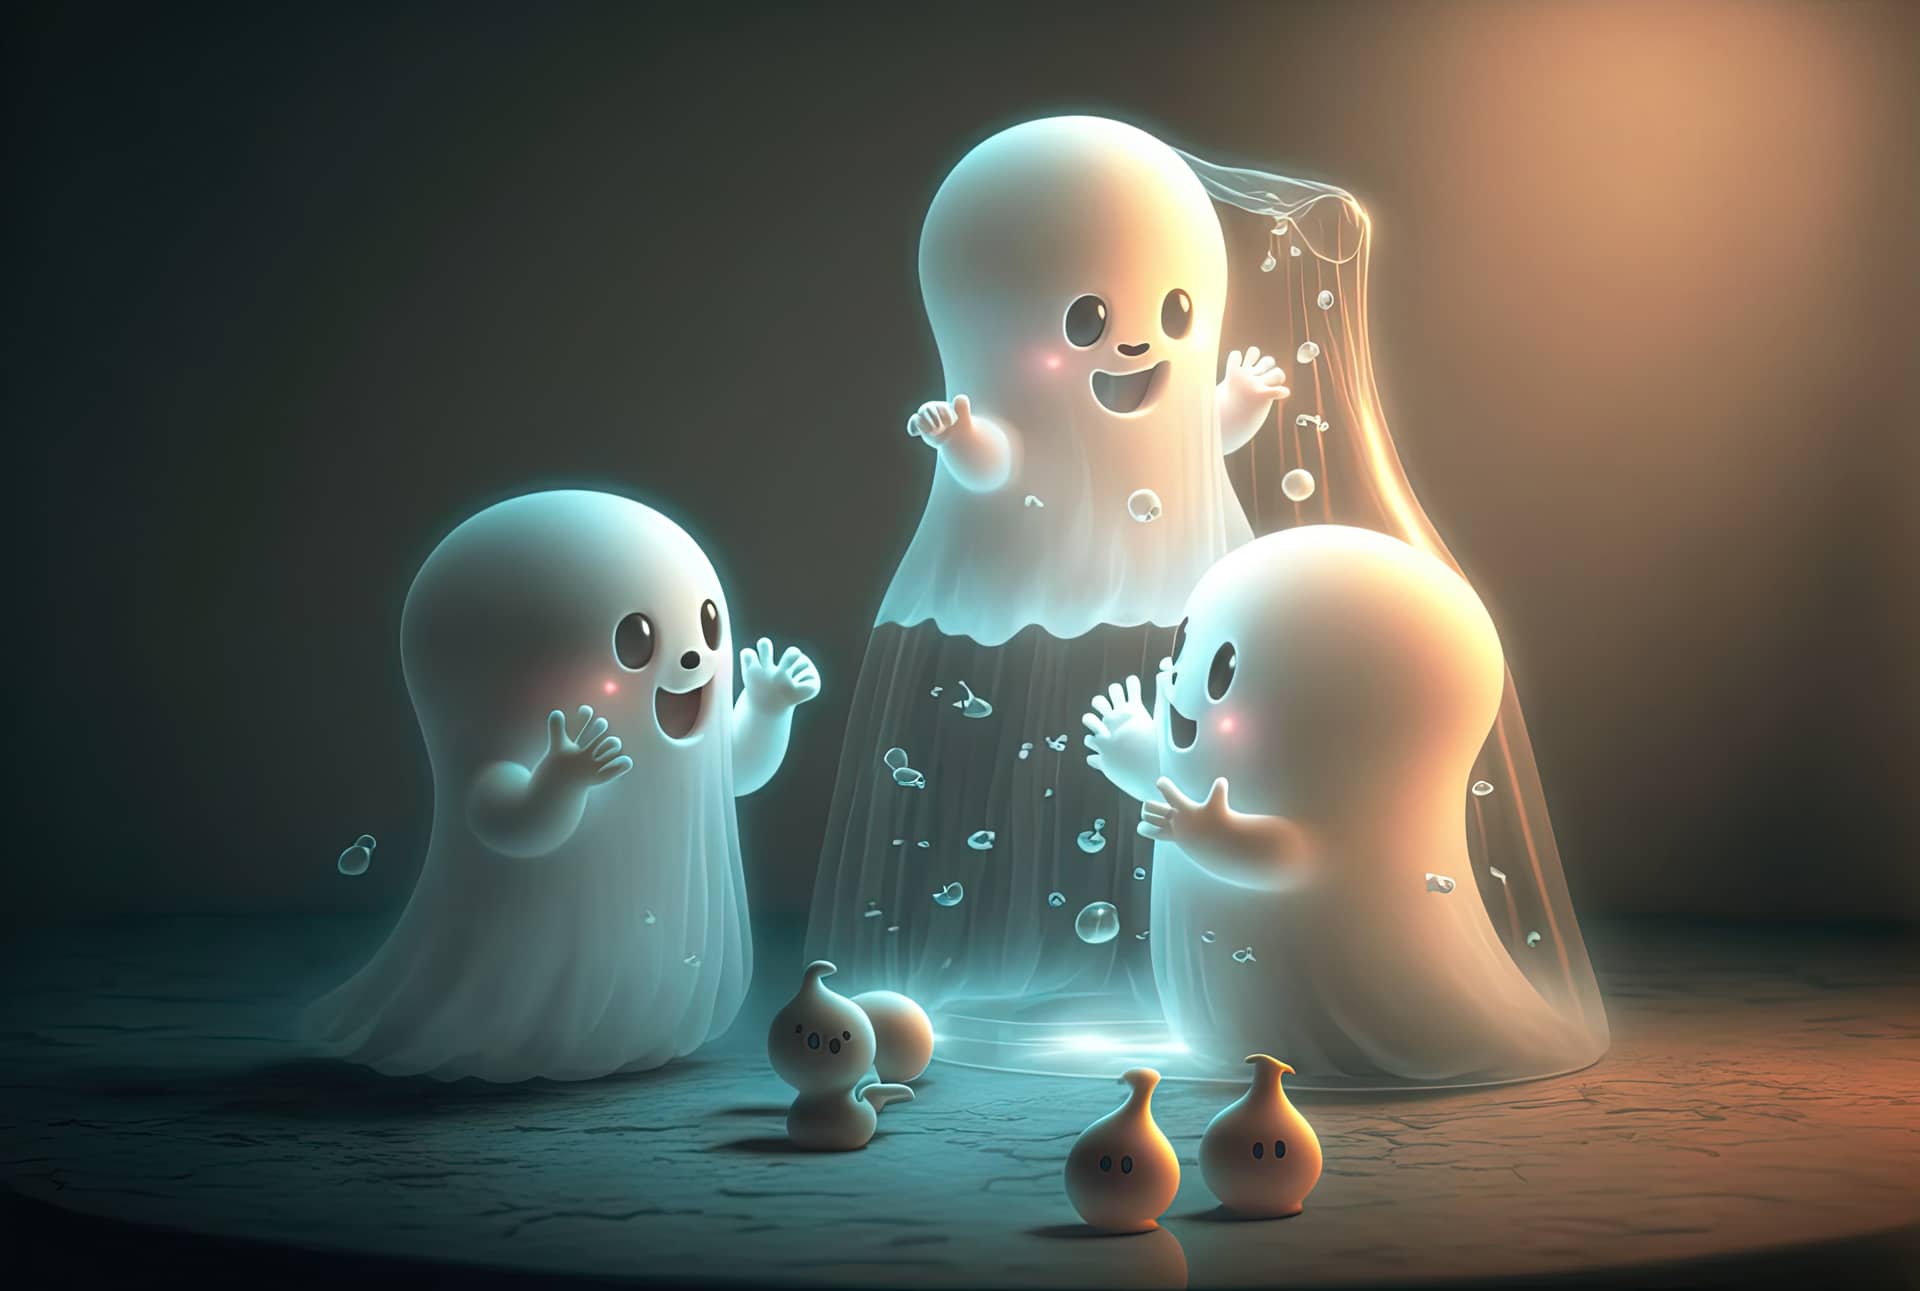 Cute so scary ghost playing having fun generative realistic image